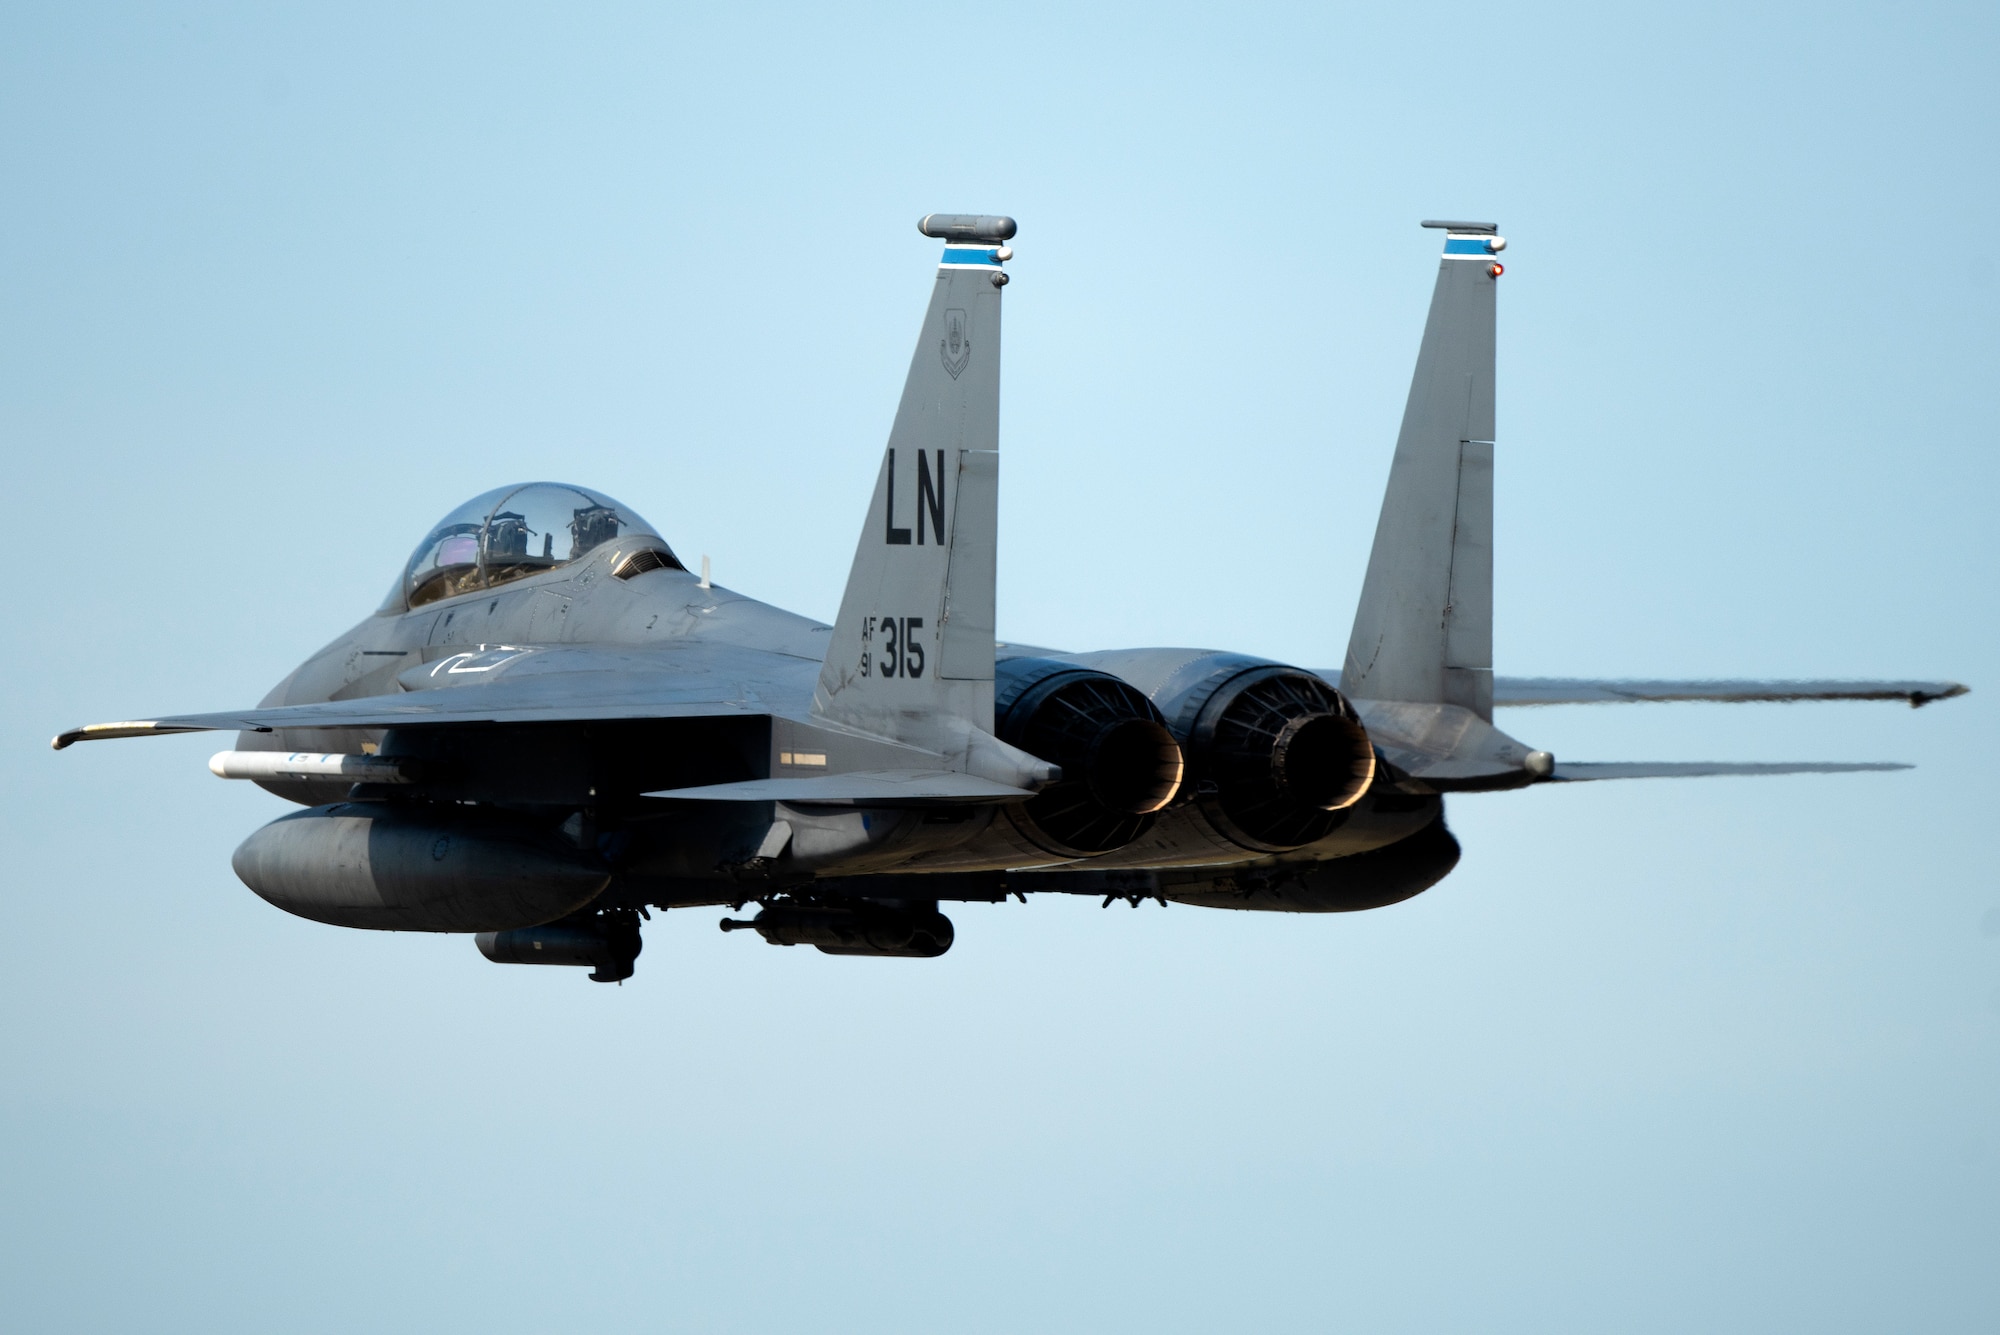 An F-15E Strike Eagle assigned to the 492nd Fighter Squadron flies over Royal Air Force Lakenheath, England, May 20, 2020. An array of avionics and electronics systems gives the F-15E the capability to fight at low altitude, day or night and in all weather. (U.S. Air Force photo by Airman 1st Class Jessi Monte)